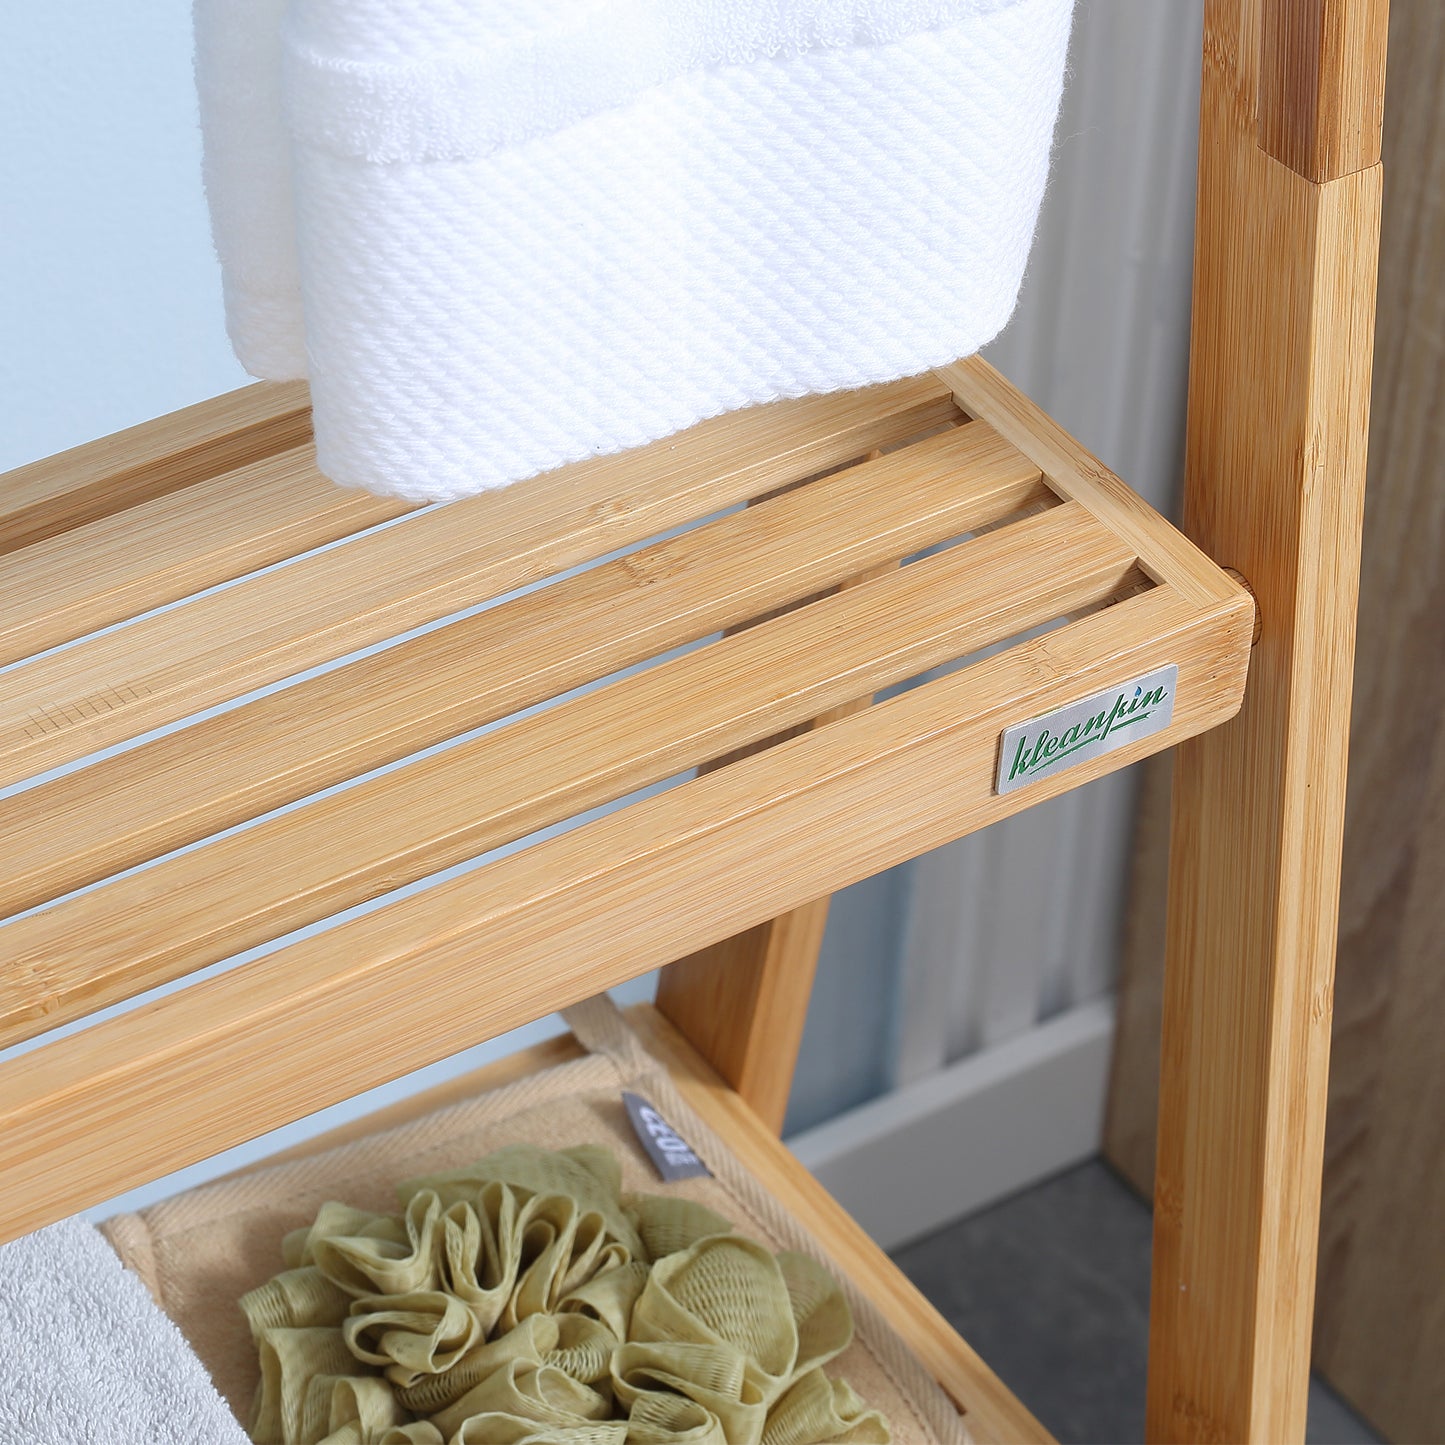 kleankin Freestanding Natural Bamboo Towel Rack with 3 Towel Rails and 3 Storage Shelves, Space-Saving Foldable Towel Holder for Bathroom